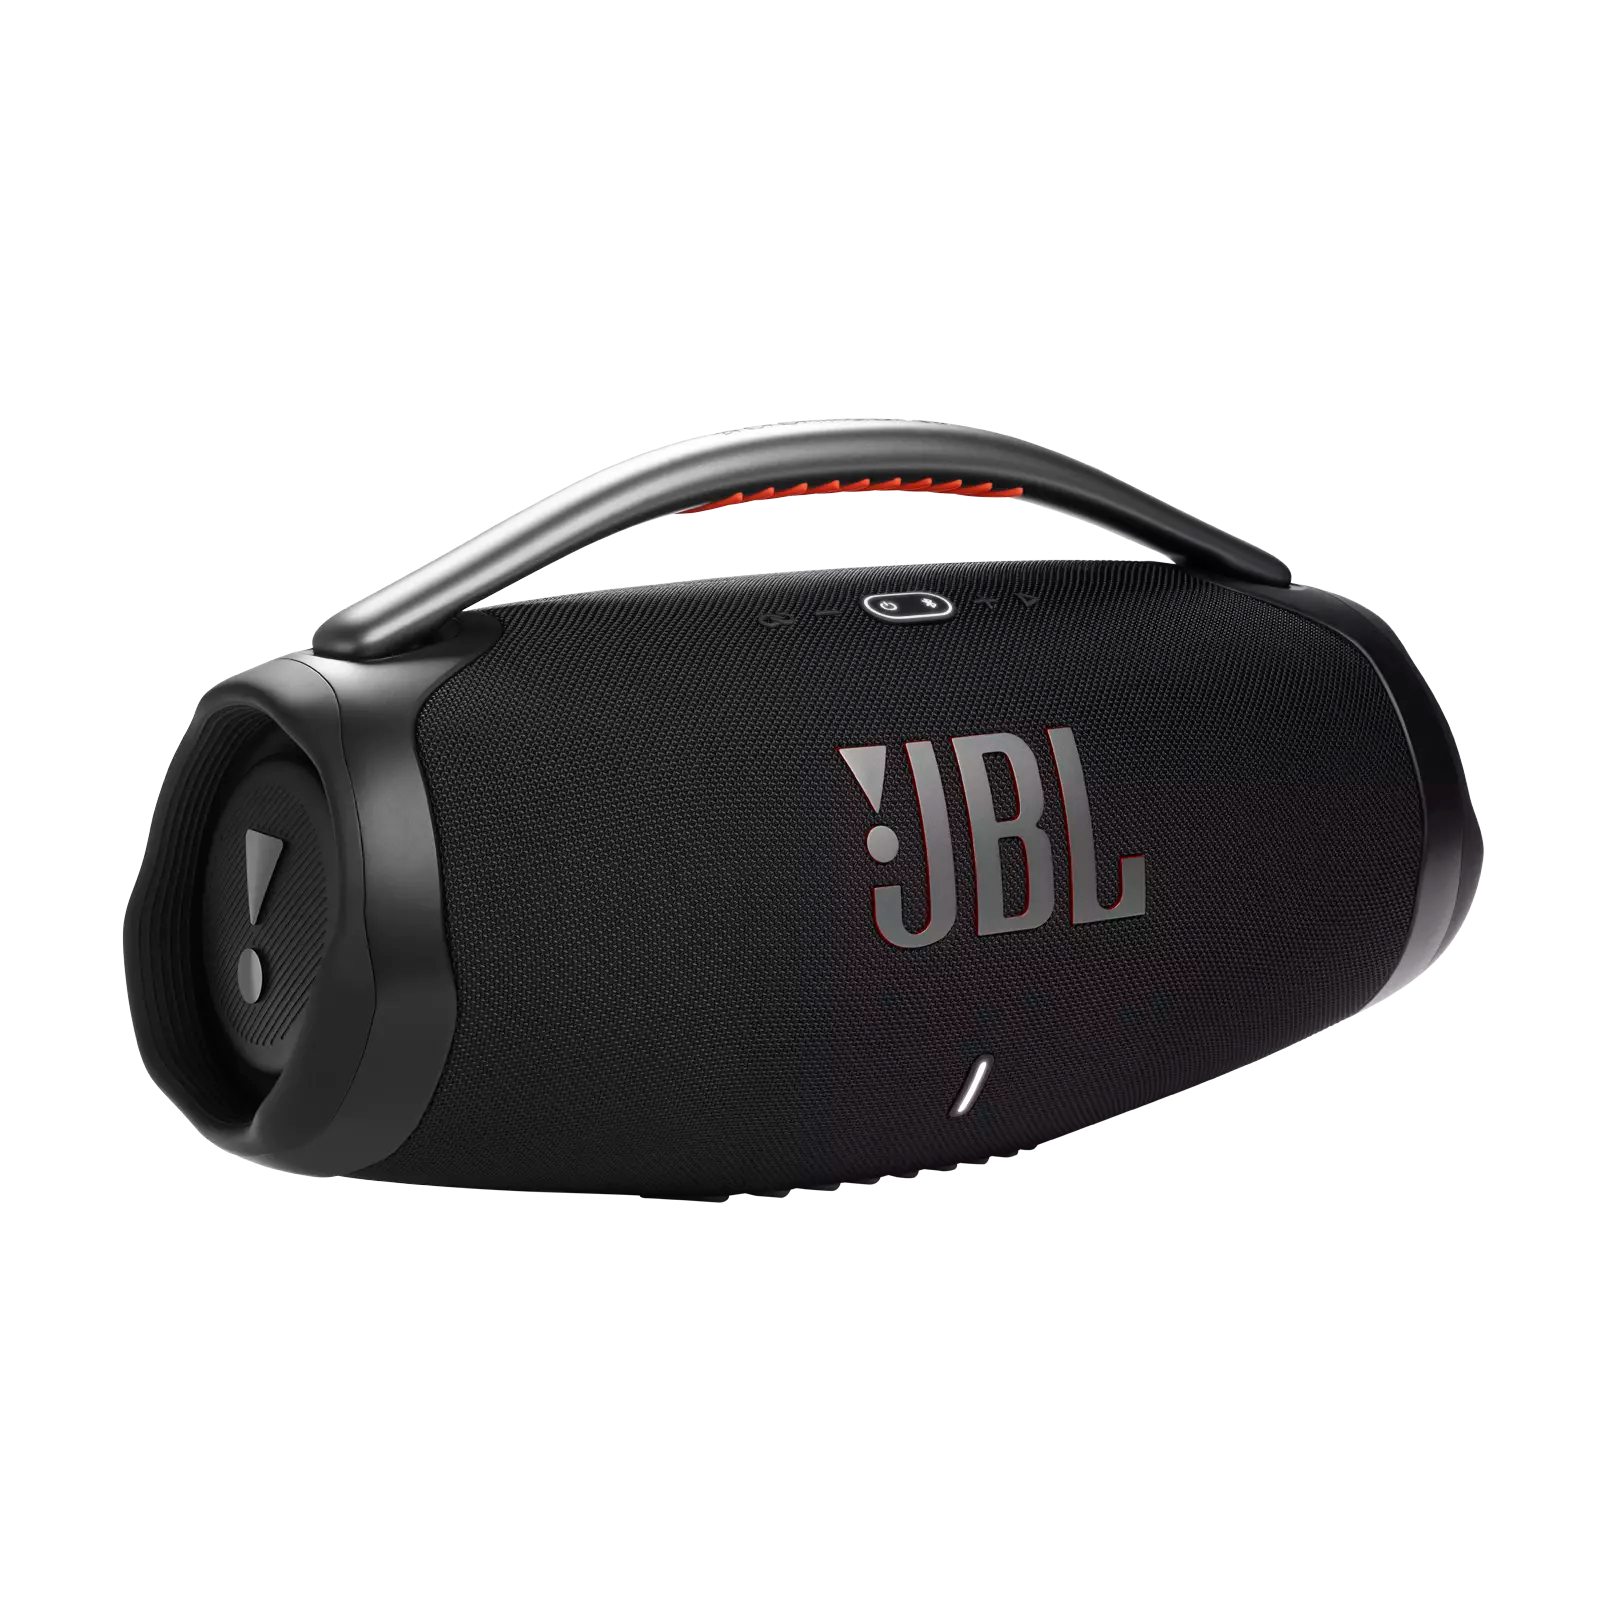 Just in time for New Year's Eve, the JBL Xtreme 3 is on sale at a